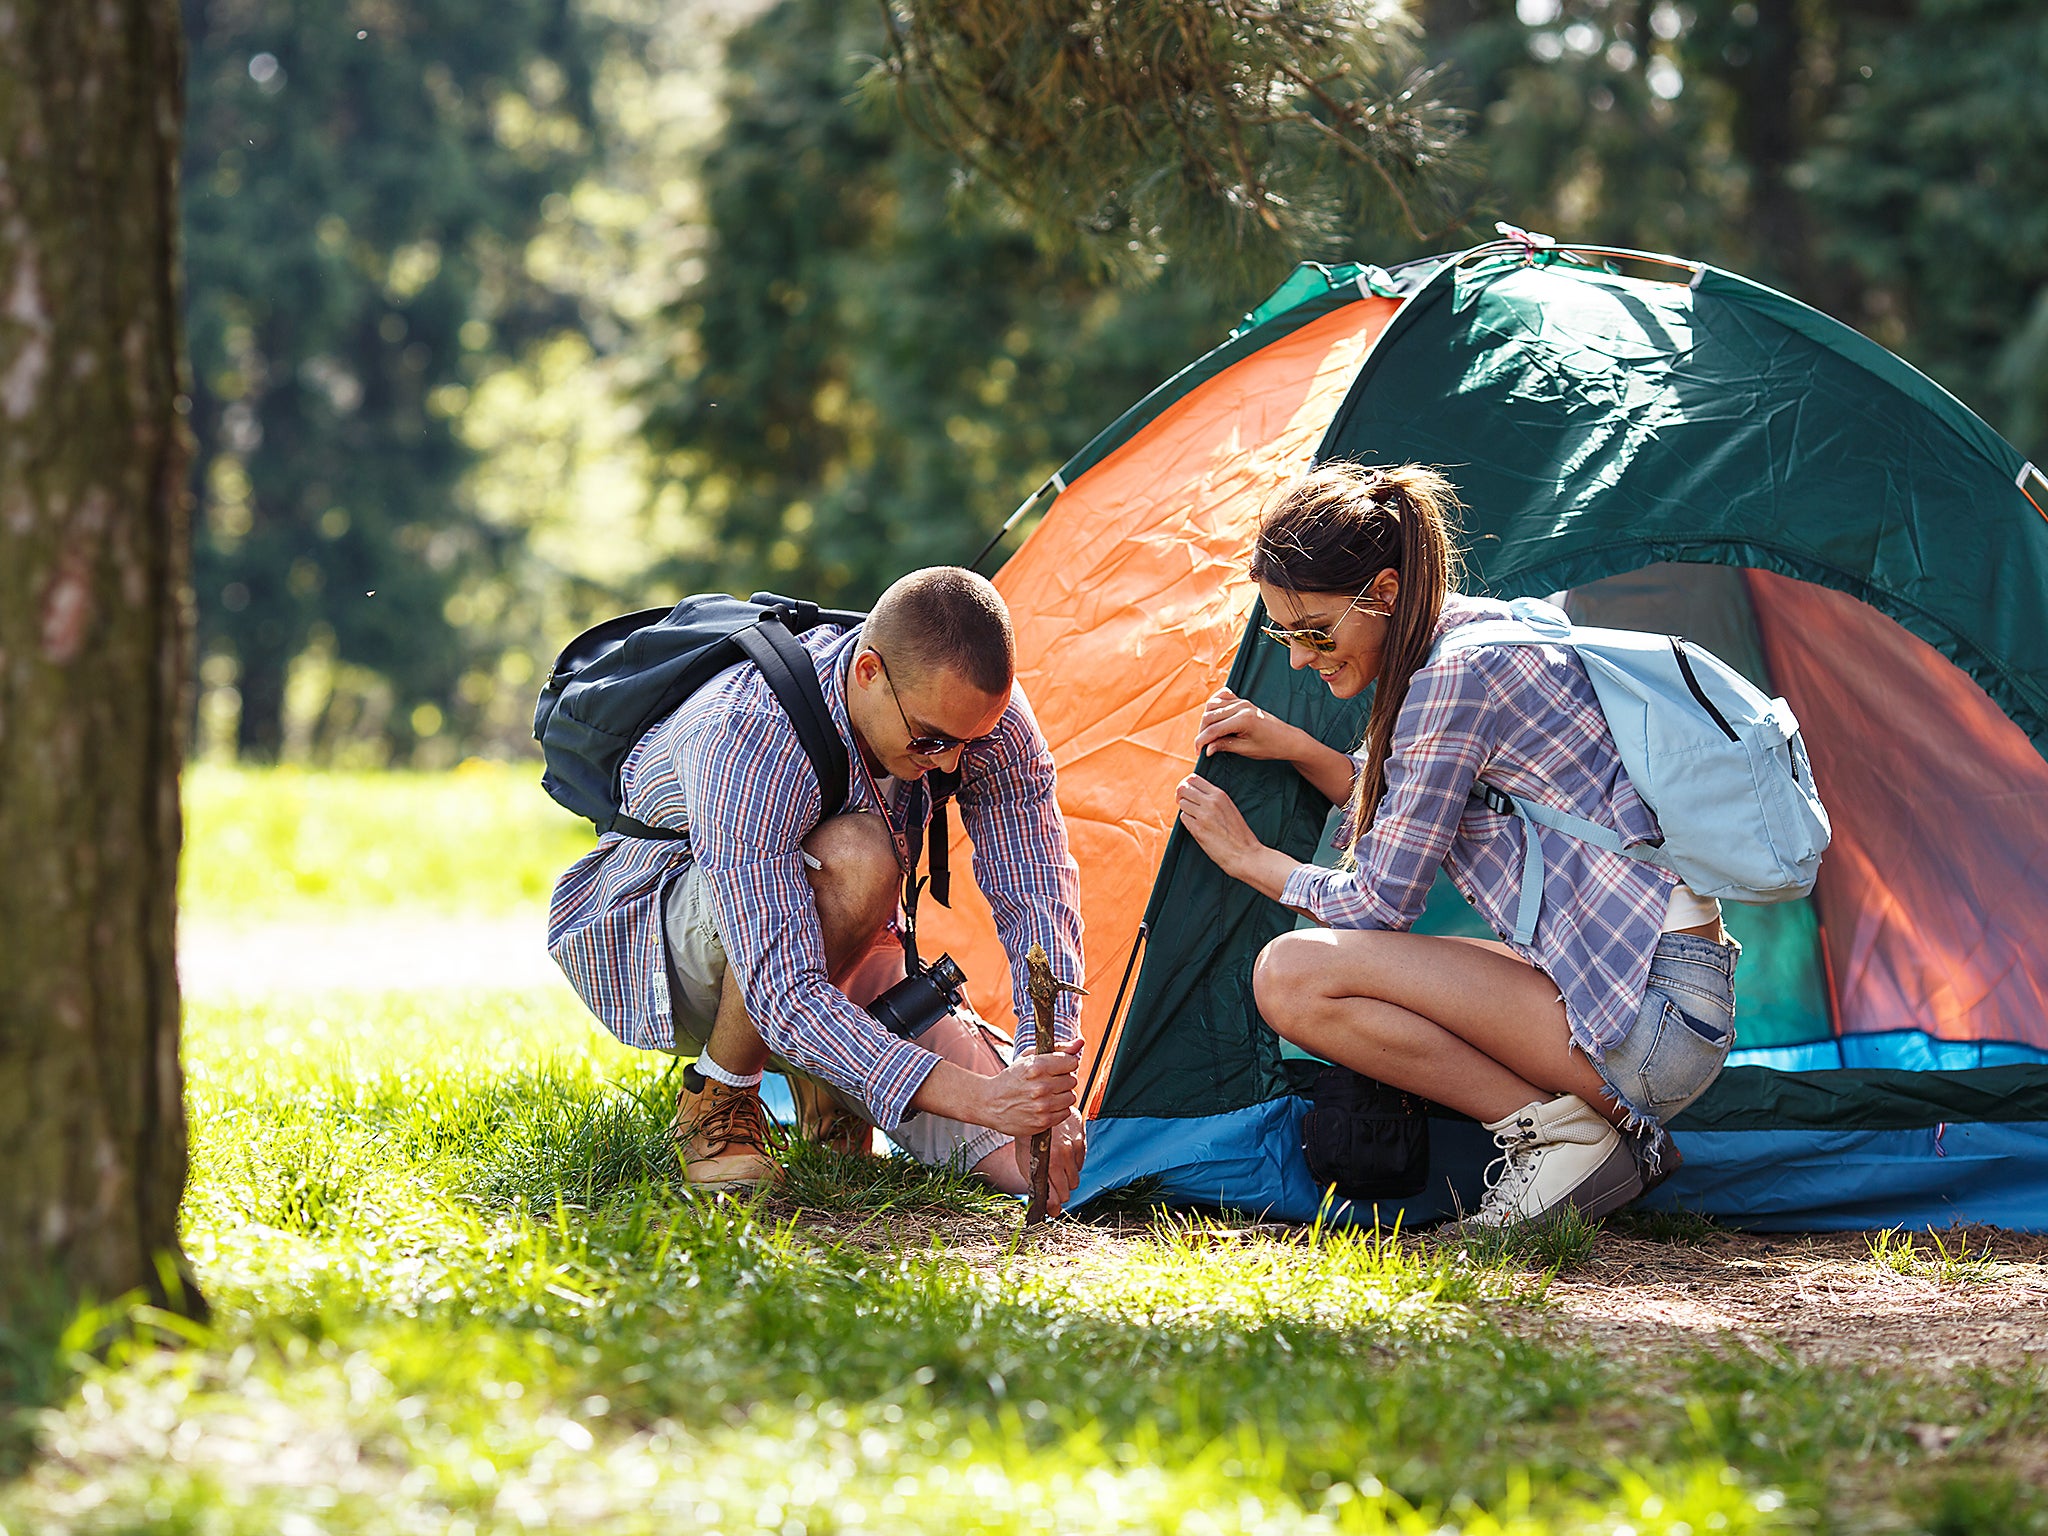 Halfords said sales of camping equipment were the highest on record